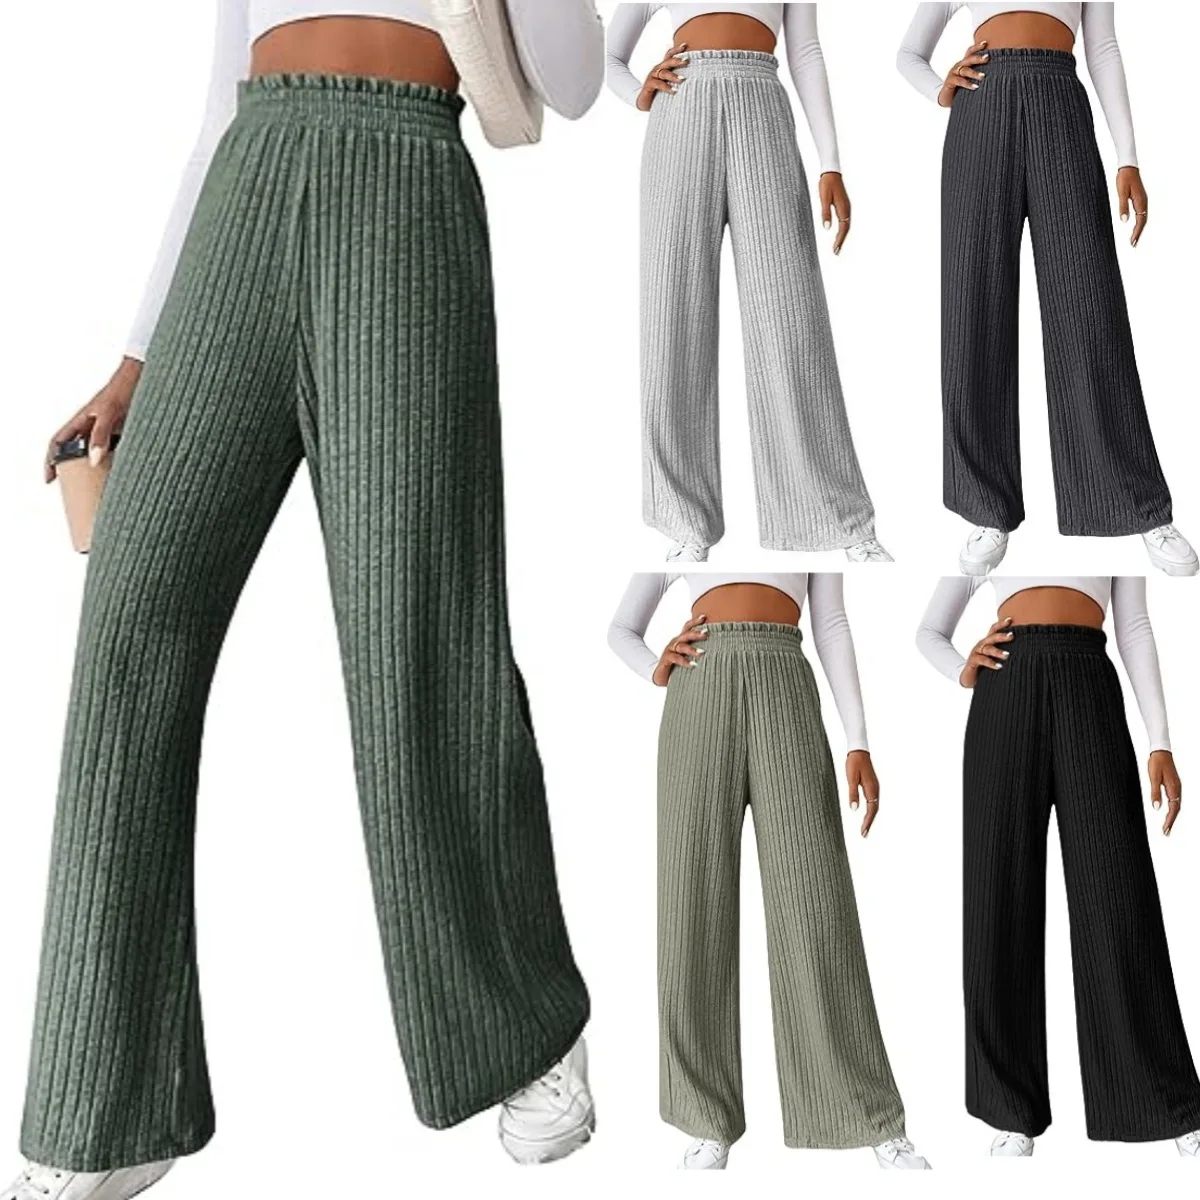 Yitimuceng Plain Fitness Joggers Travel Knitted Womens Outfits Long Sleeve Split Chic Casual Wide Leg Sweatpants Straight Pants